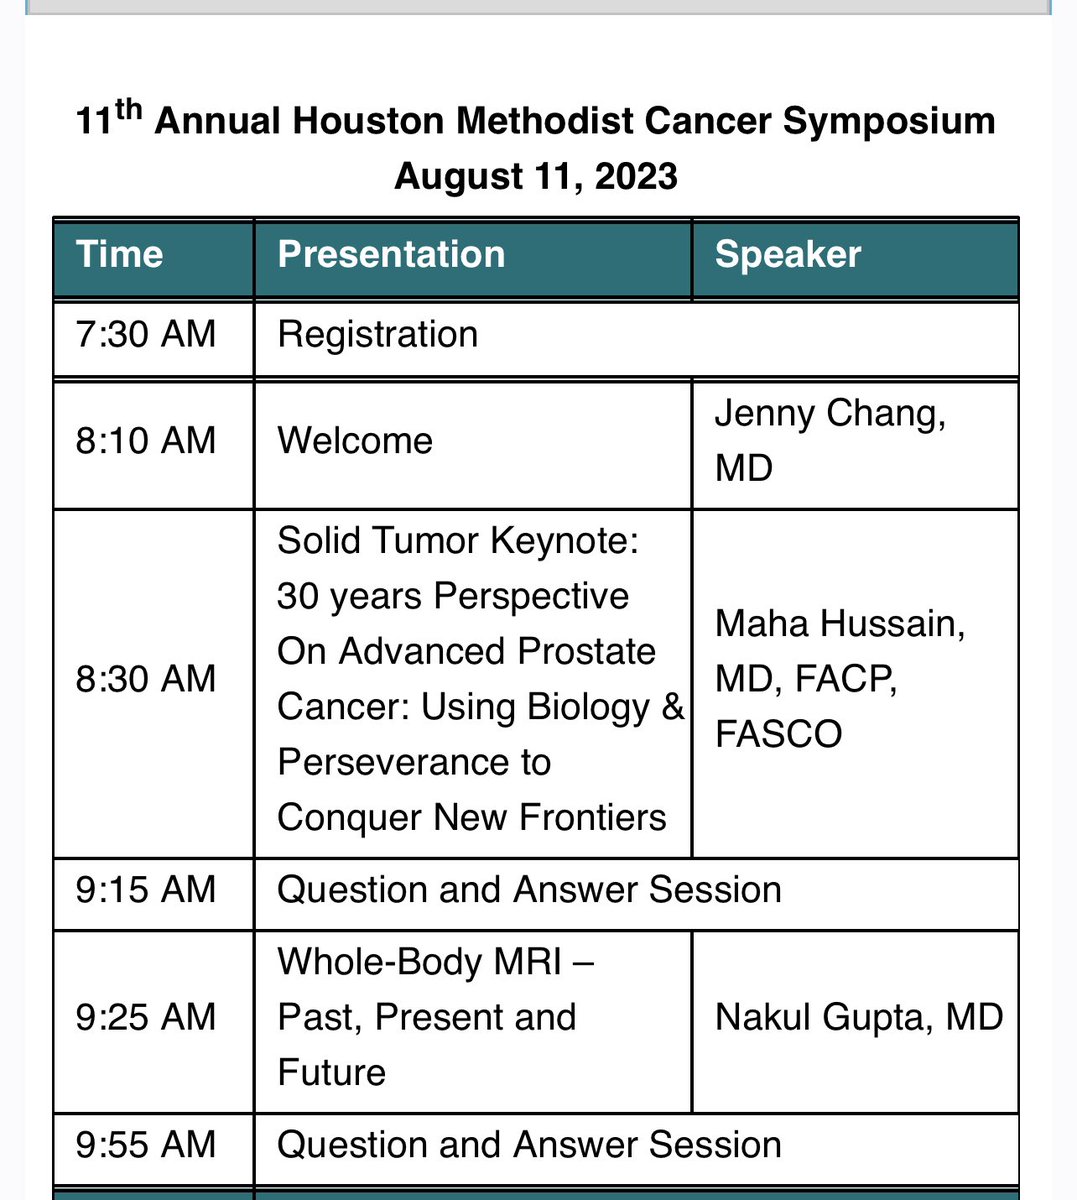 So Honored to have one of the Giants of GU oncology Dr Maha Hussain as one of our keynote speakers during our Houston Methodist Cancer Symposium 🙏🏼@MethodistHosp @HMethodistMD